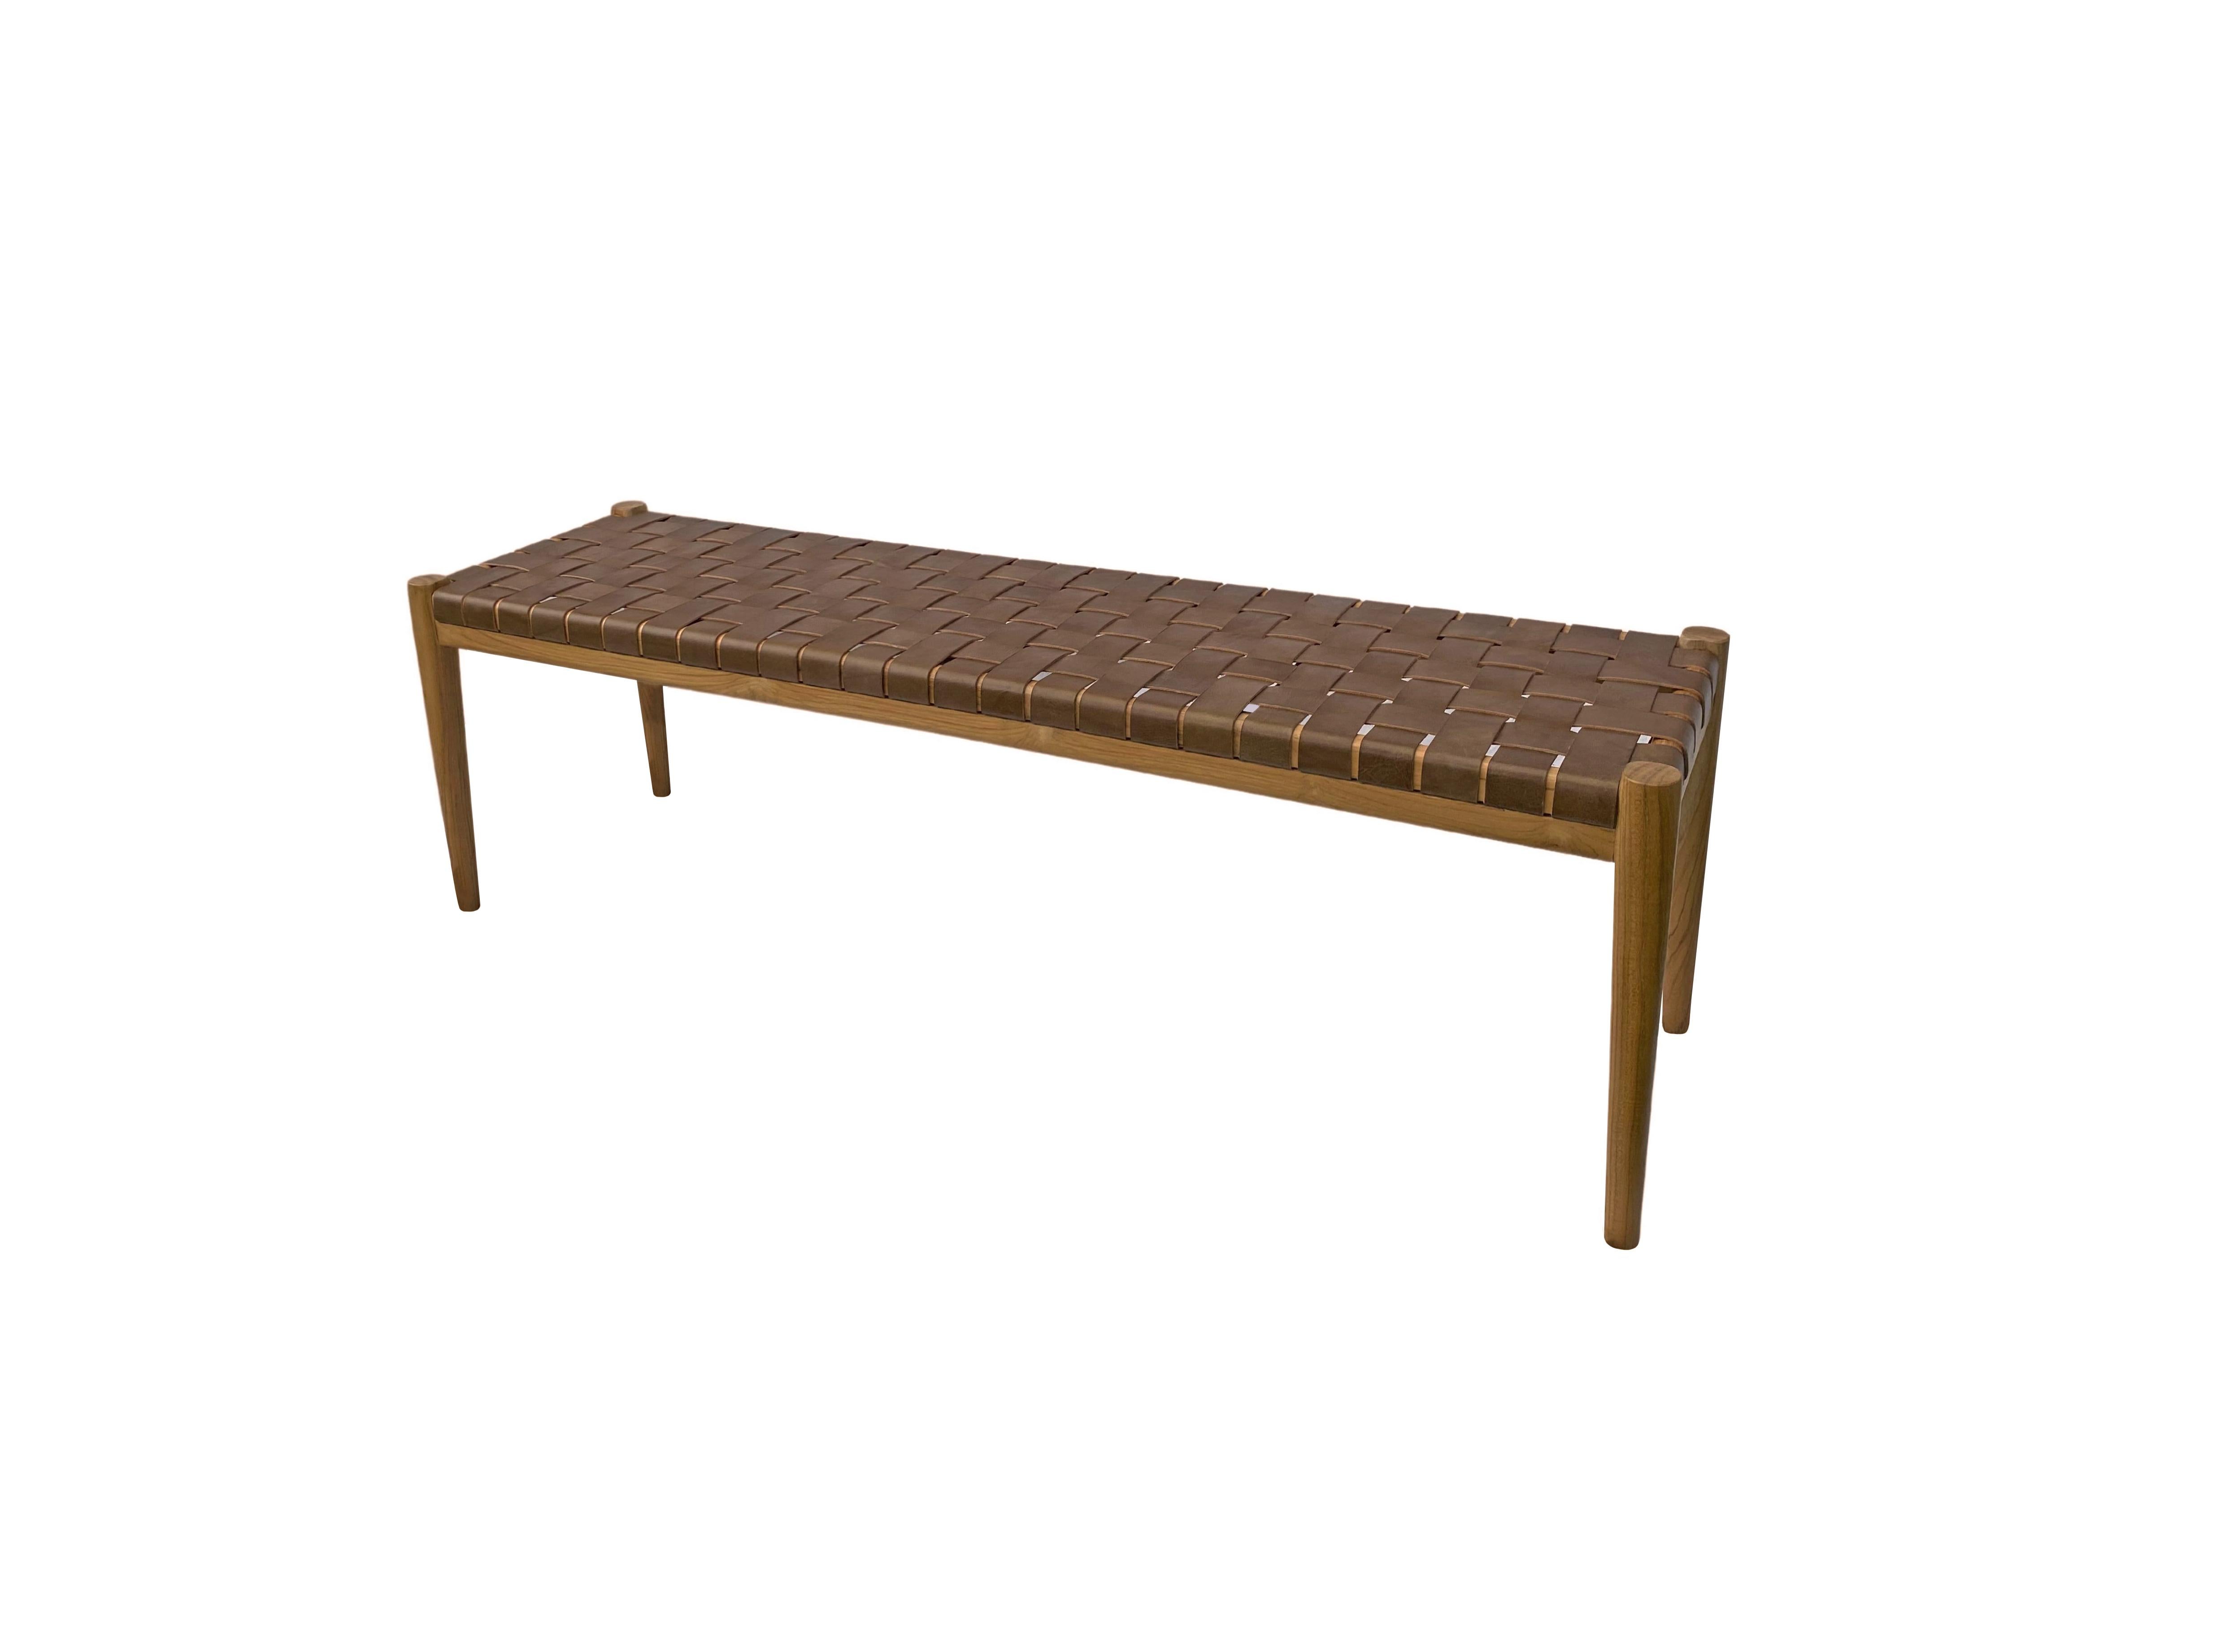 A hand-crafted teak framed & woven leather strap bench. These benches are crafted by local artisans using a wood joinery technique without the use of nails. They feature a subtle wood texture and are robust and sturdy.